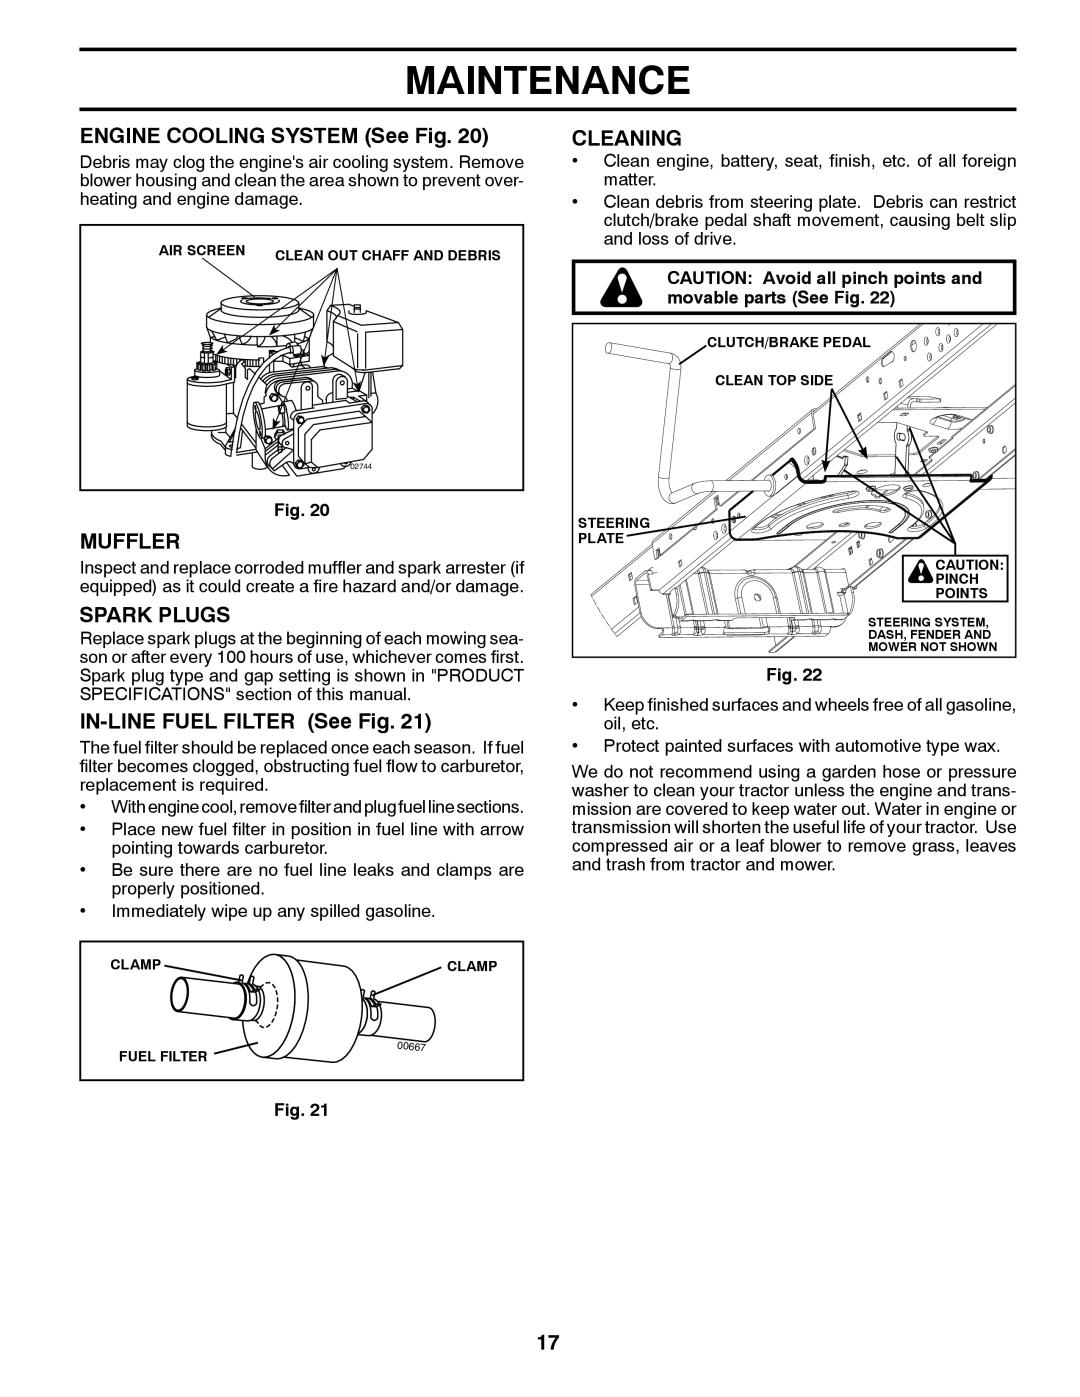 Poulan 96042010701 Maintenance, ENGINE COOLING SYSTEM See Fig, Muffler, Spark Plugs, IN-LINE FUEL FILTER See Fig, Cleaning 